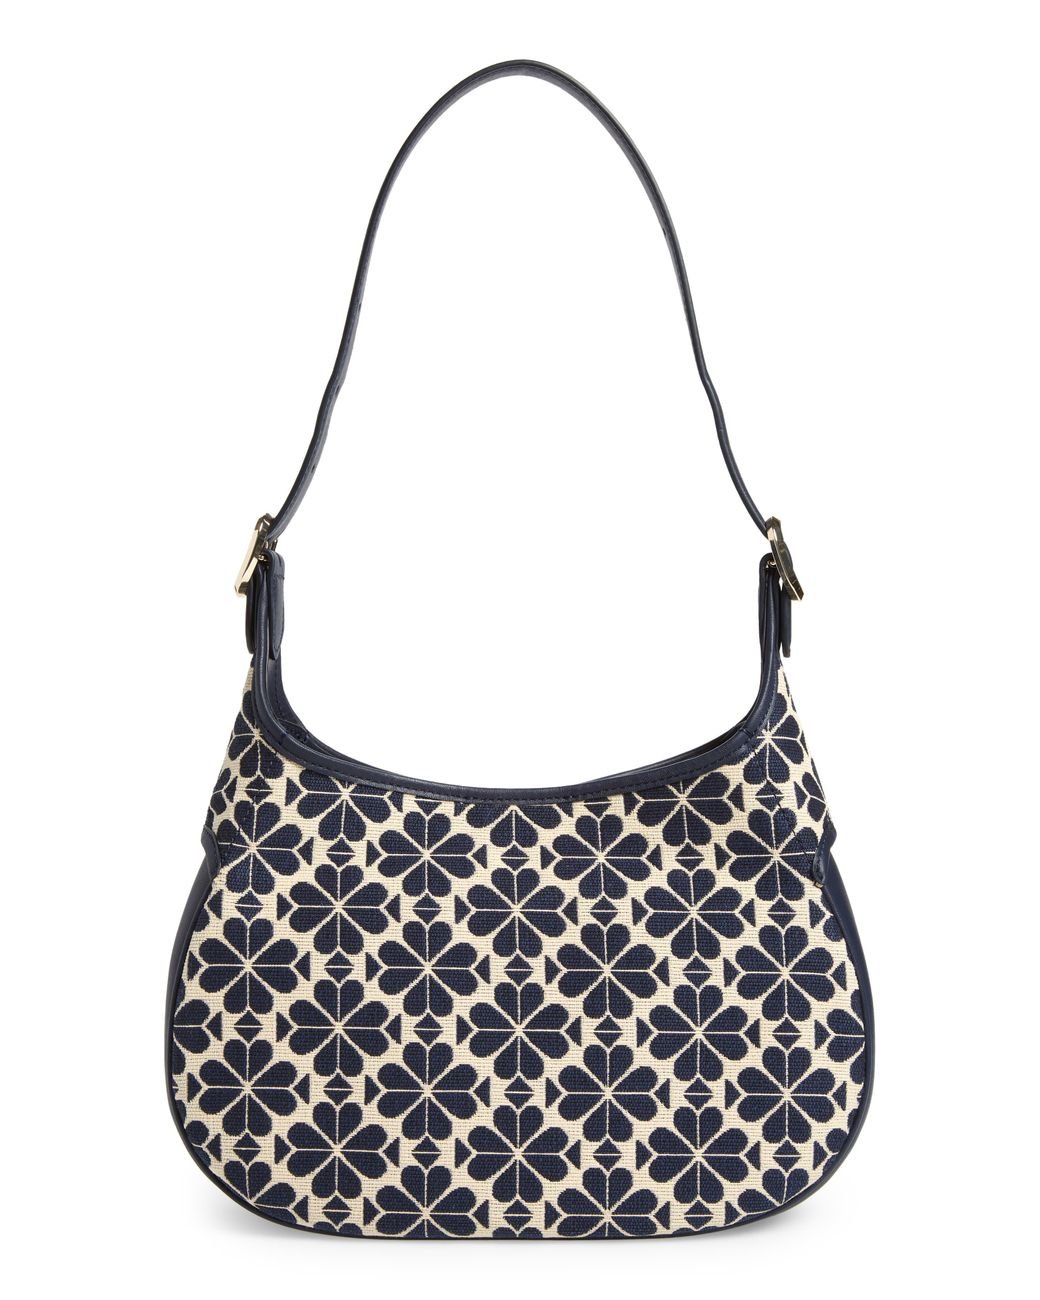 Buy Kate Spade New York Spade Flower Jacquard North/South Crossbody, Cream  Multi, One Size at Amazon.in